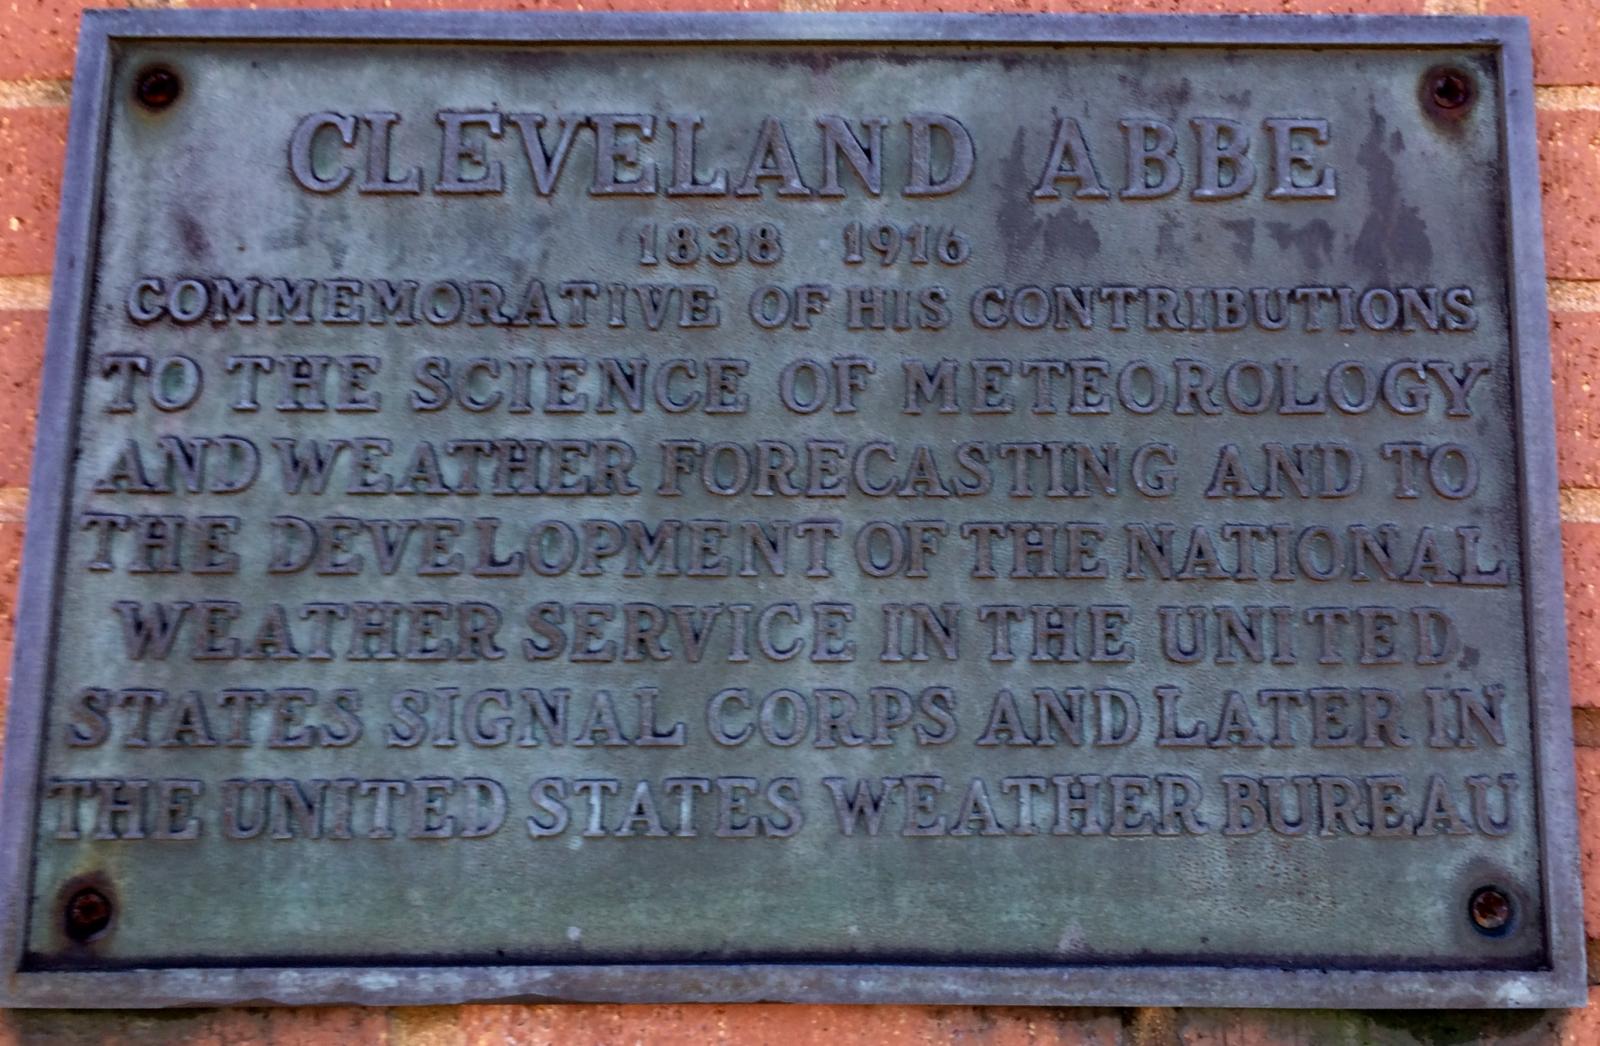 Abbe Plaque at NWS Wilmington